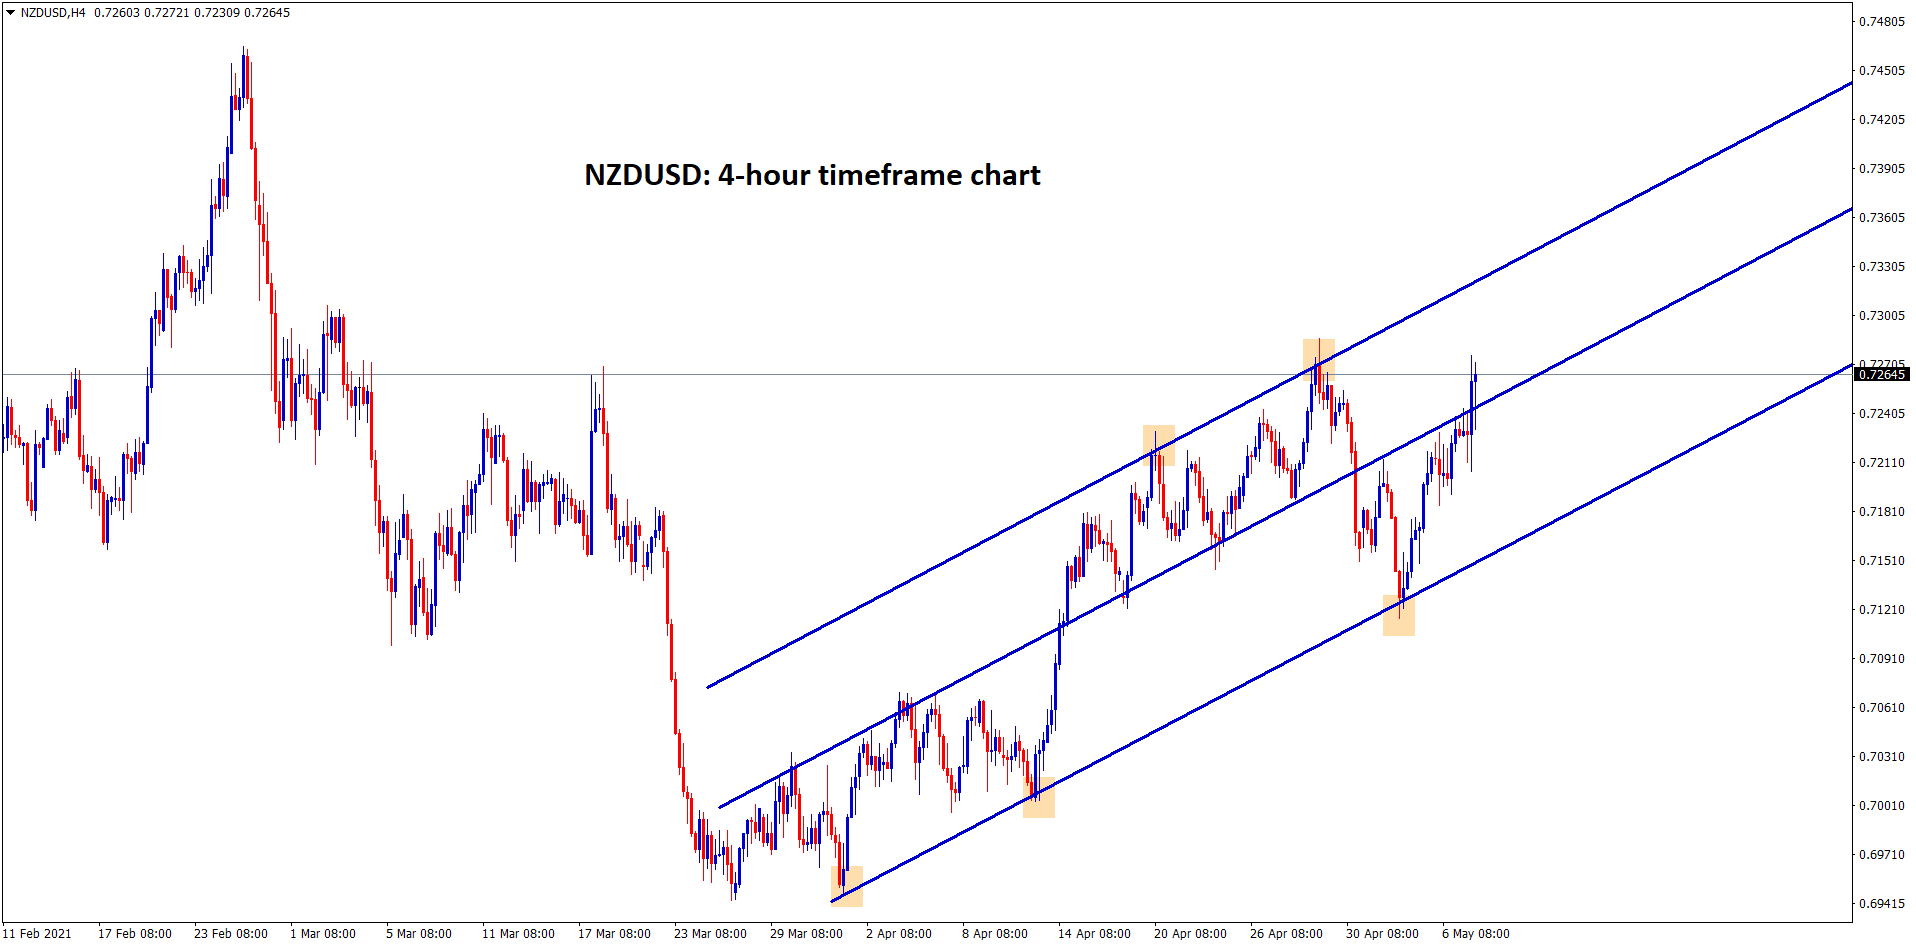 NZDUSD is moving uptrend in an Ascending channel